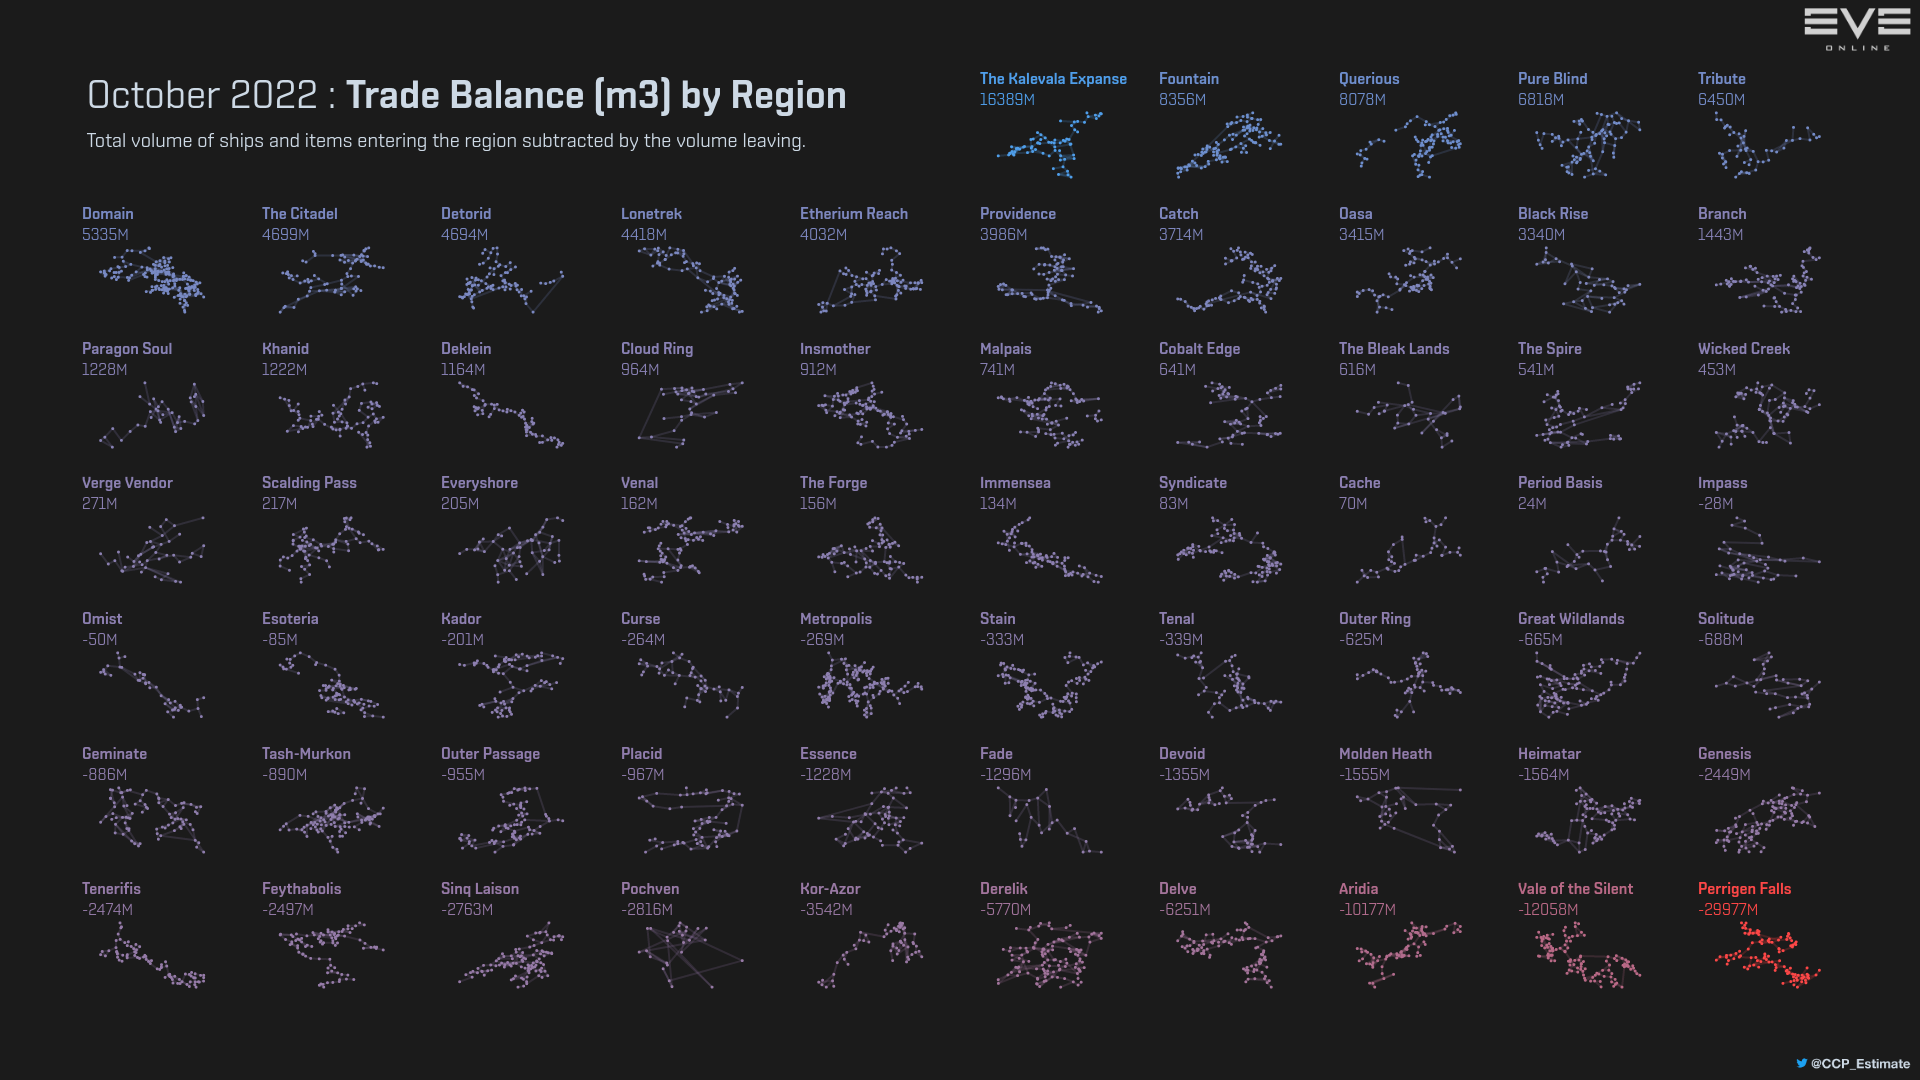 5_trade_balance_m3_by_region.png